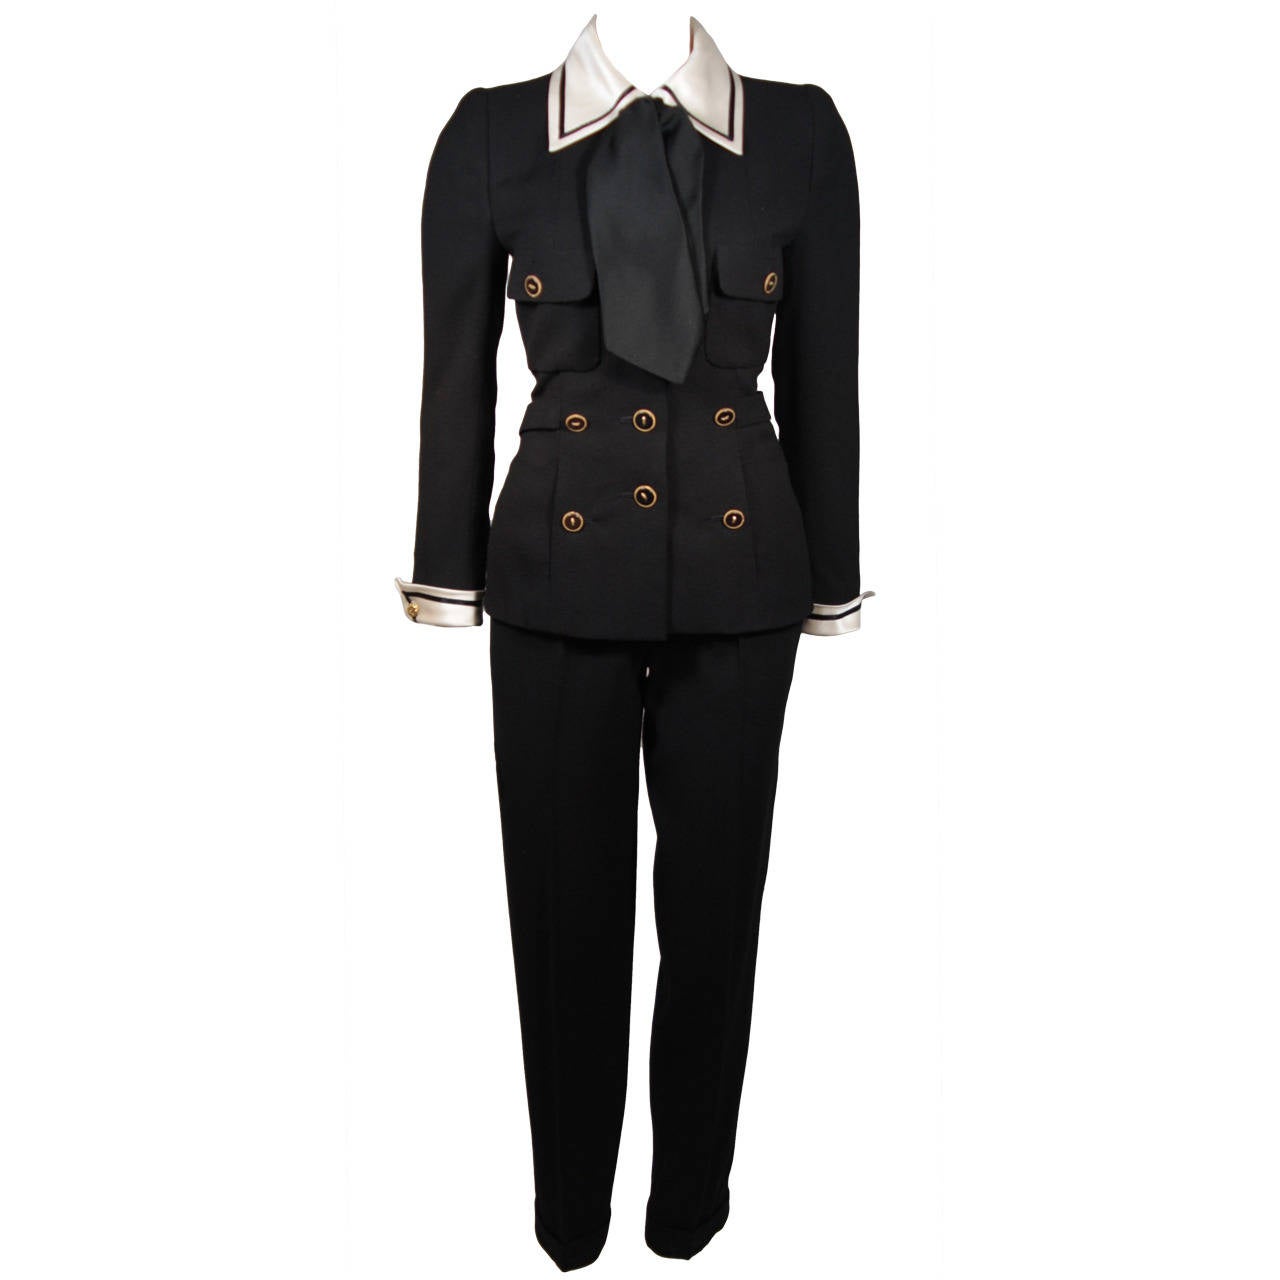 Chanel Haute Couture Black Wool Sailor Inspired Suit Size 2-4 EU 34-36